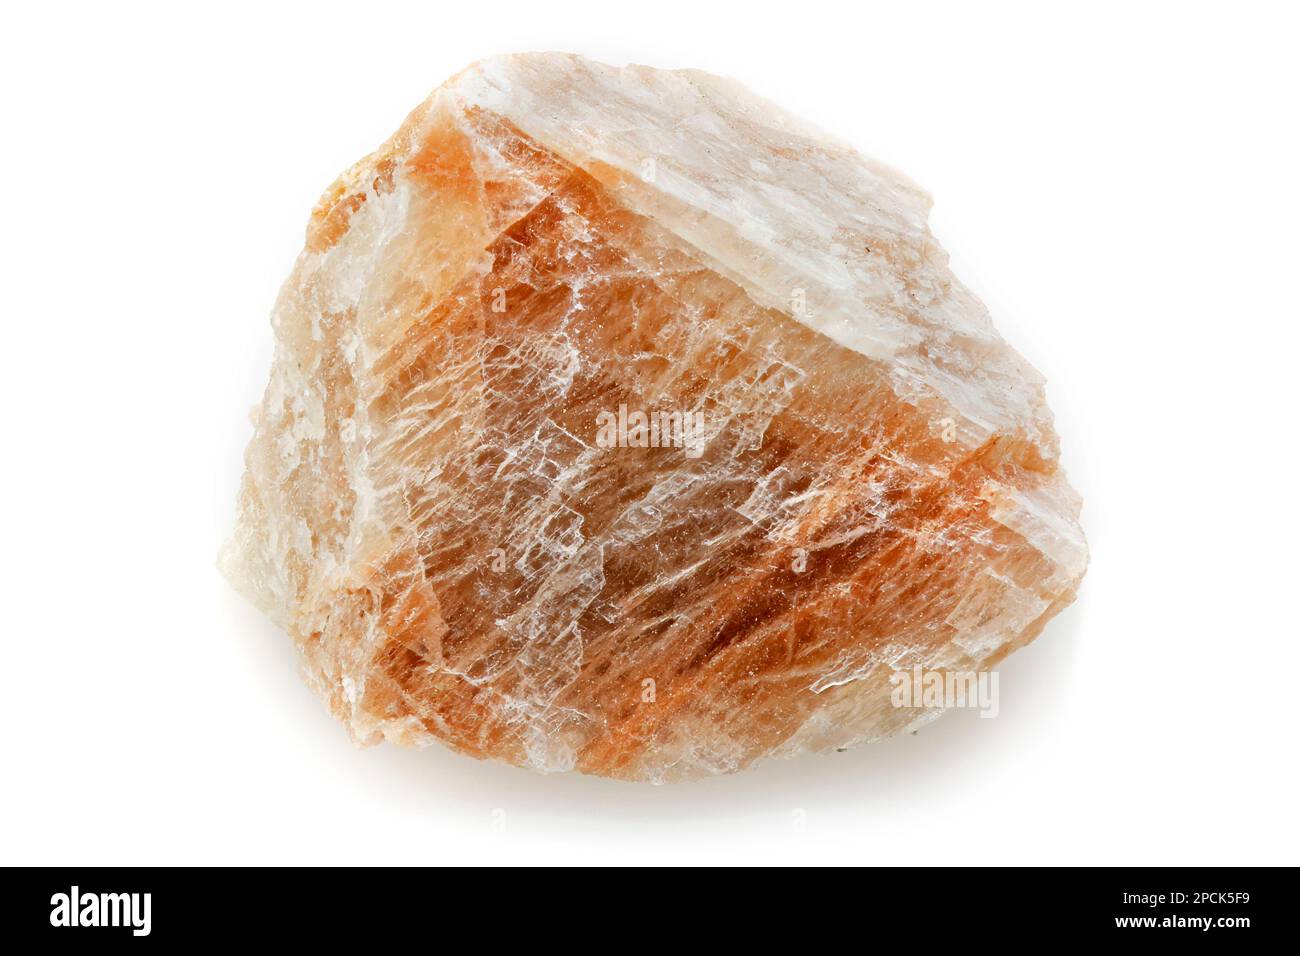 Orthoclase, Igneous Mineral, Quebec, Canada Stock Photo